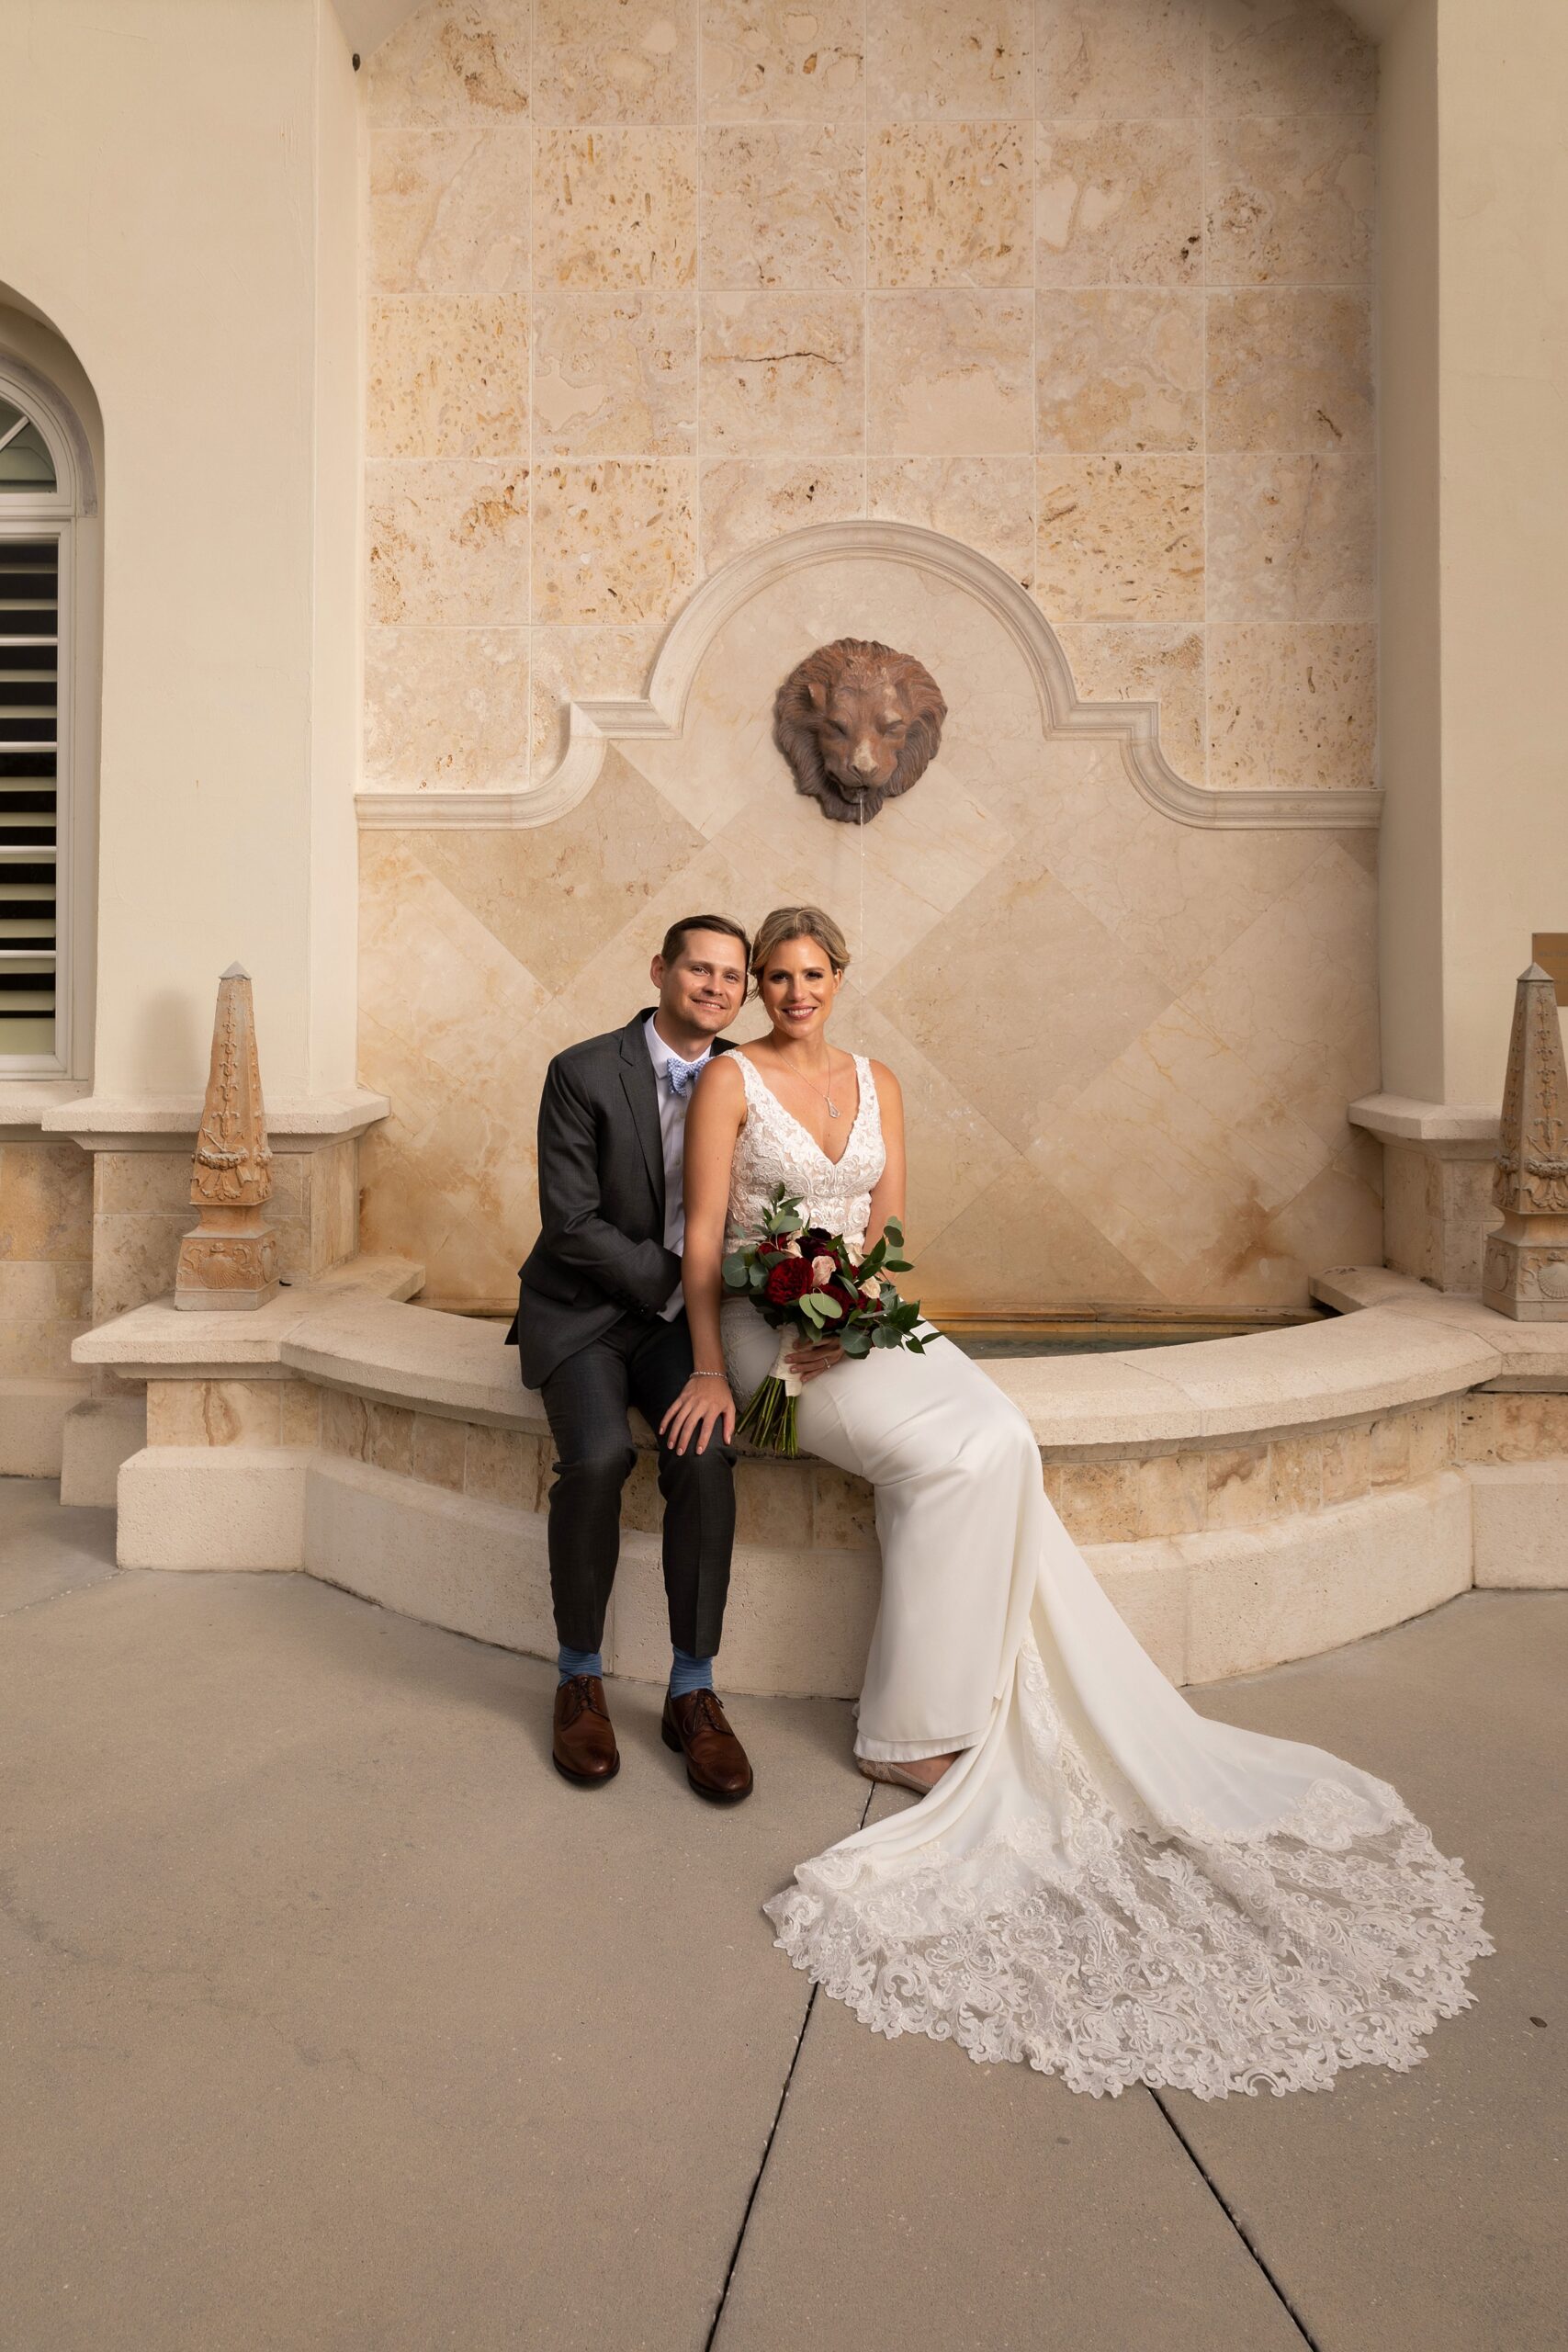 Newlyweds sit smiling on the edge of a large indoor marble fountain